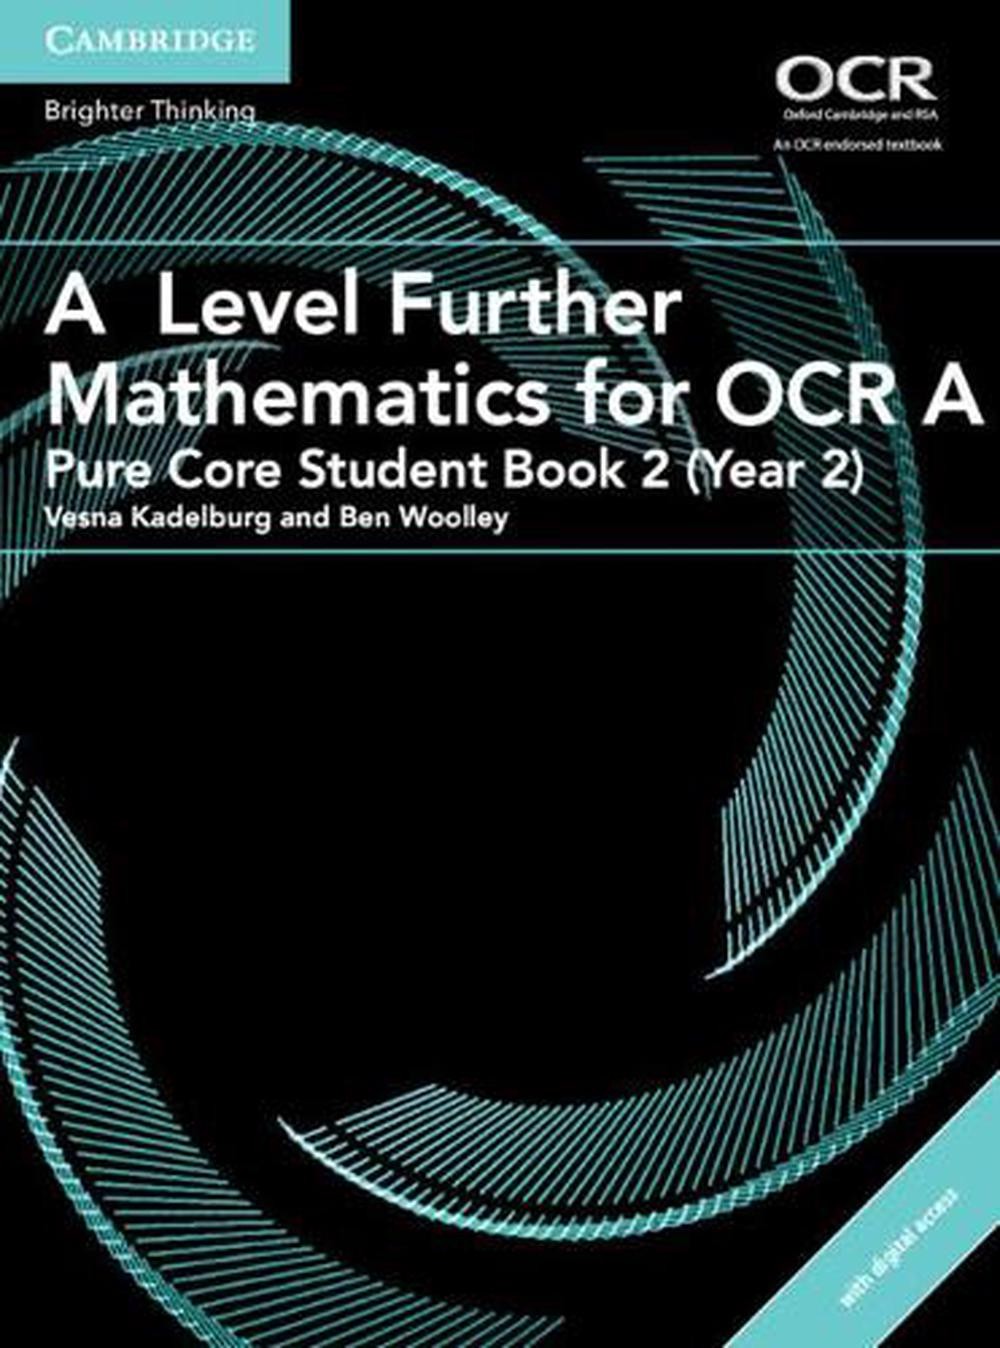 A Level Mathematics for OCR a Student Book 2 (Year 2)